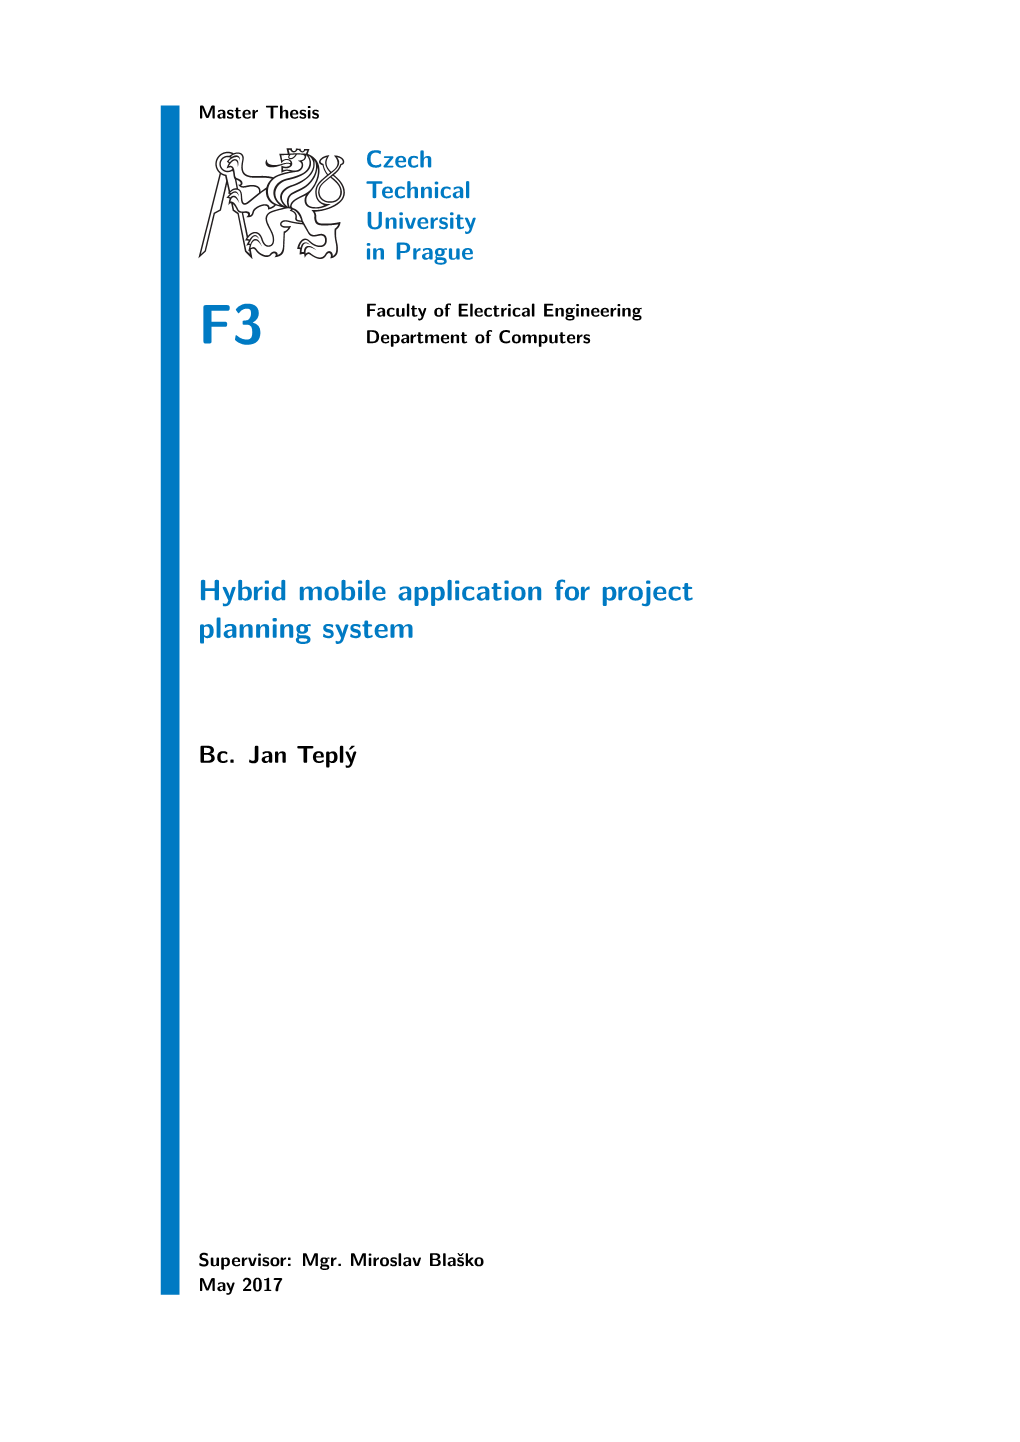 Hybrid Mobile Application for Project Planning System